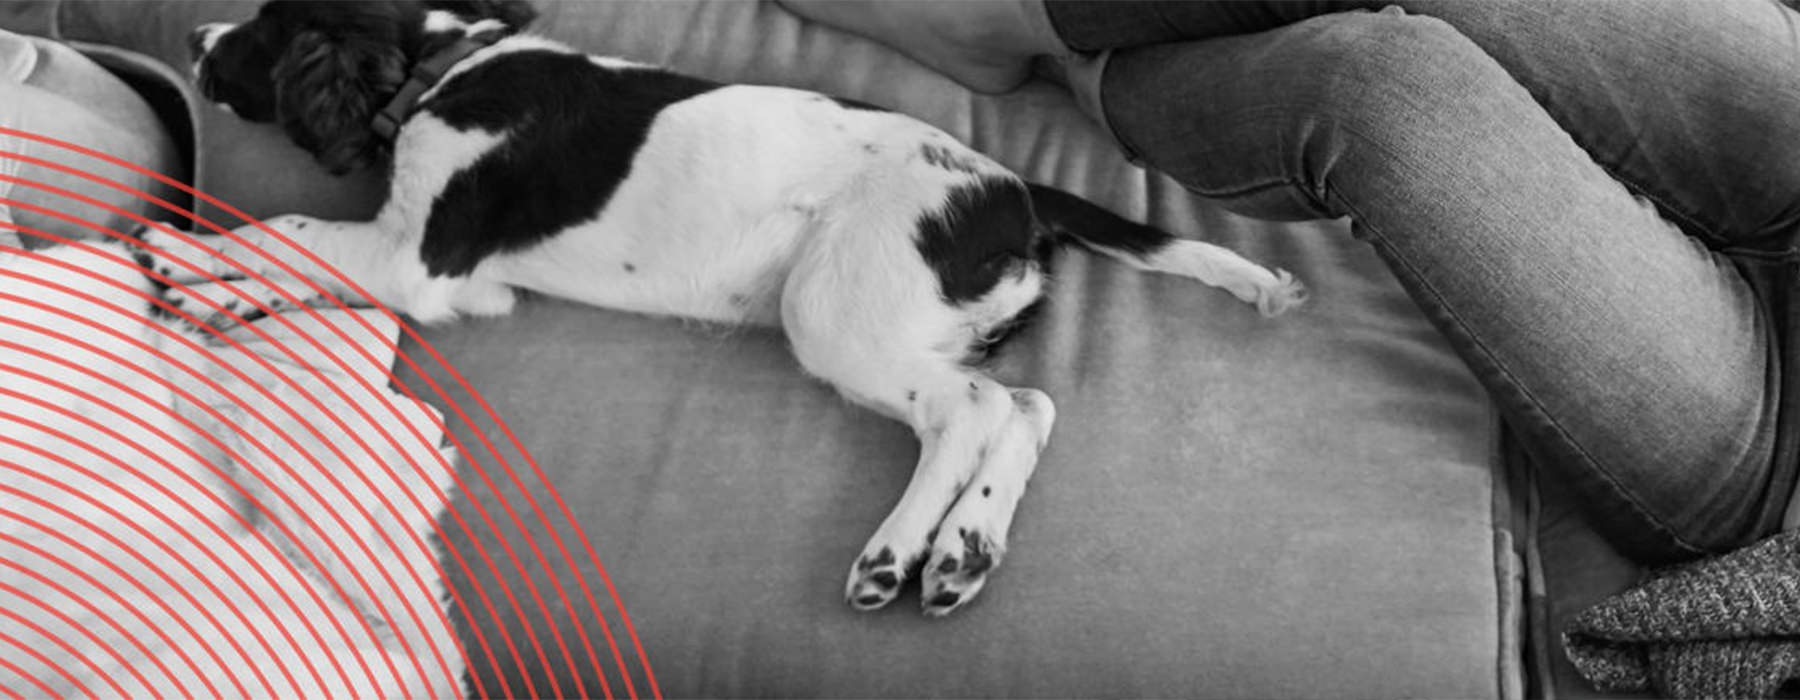 Puppy Sleeping on Couch | Downtown Atlanta | RT Dairies